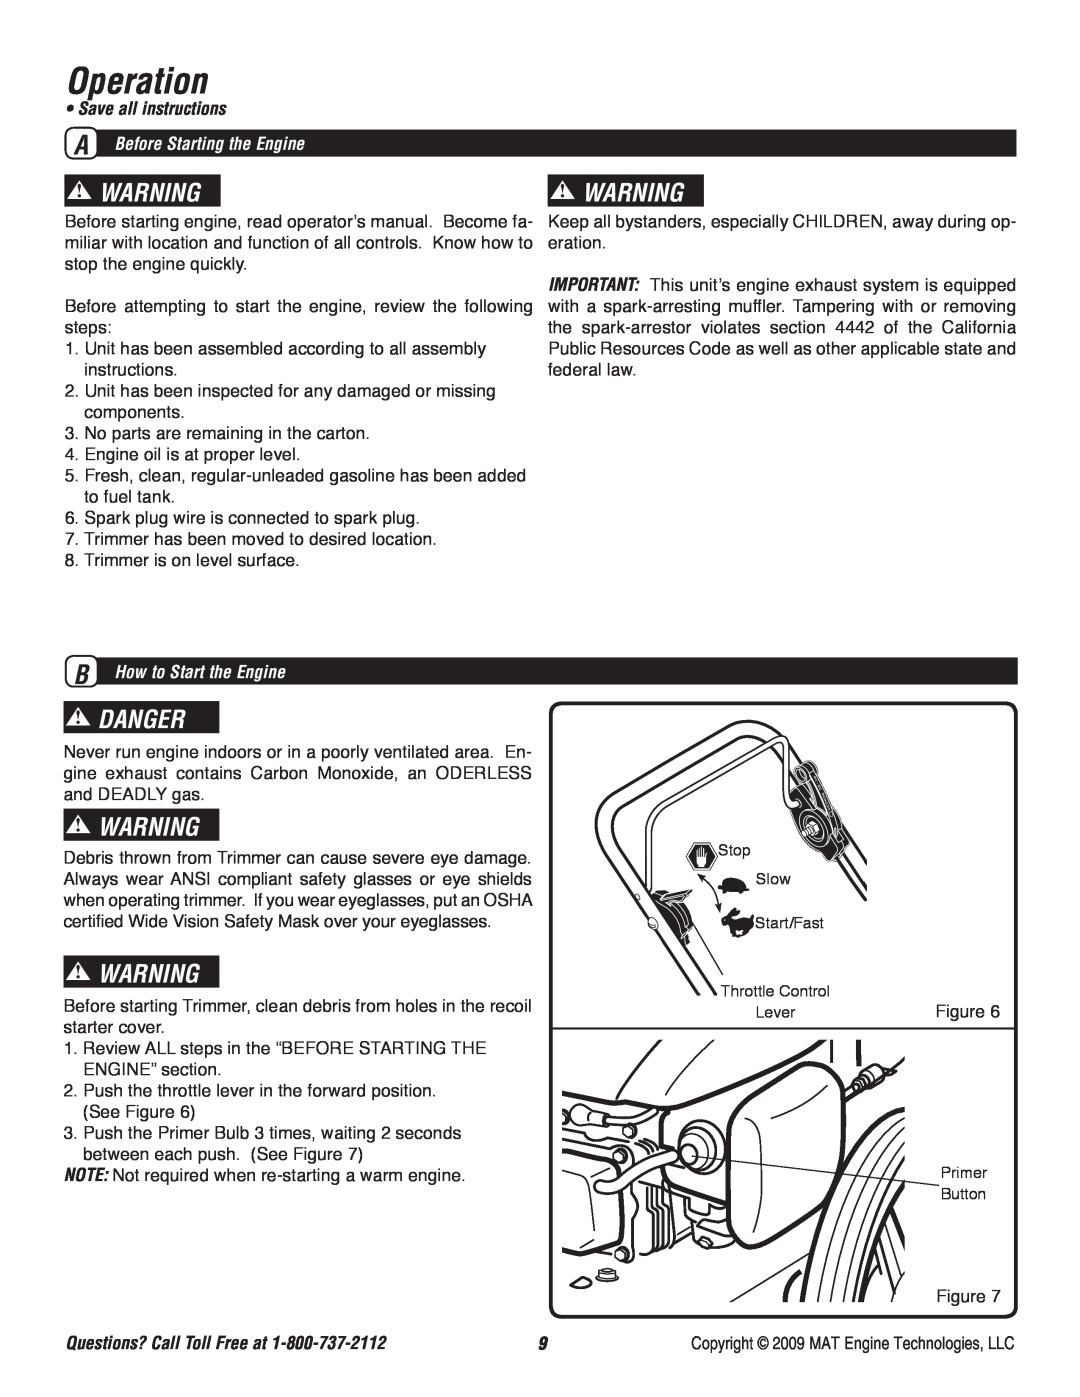 Powermate P-WFT-16022 Operation, Danger, Save all instructions, B How to Start the Engine, Questions? Call Toll Free at 